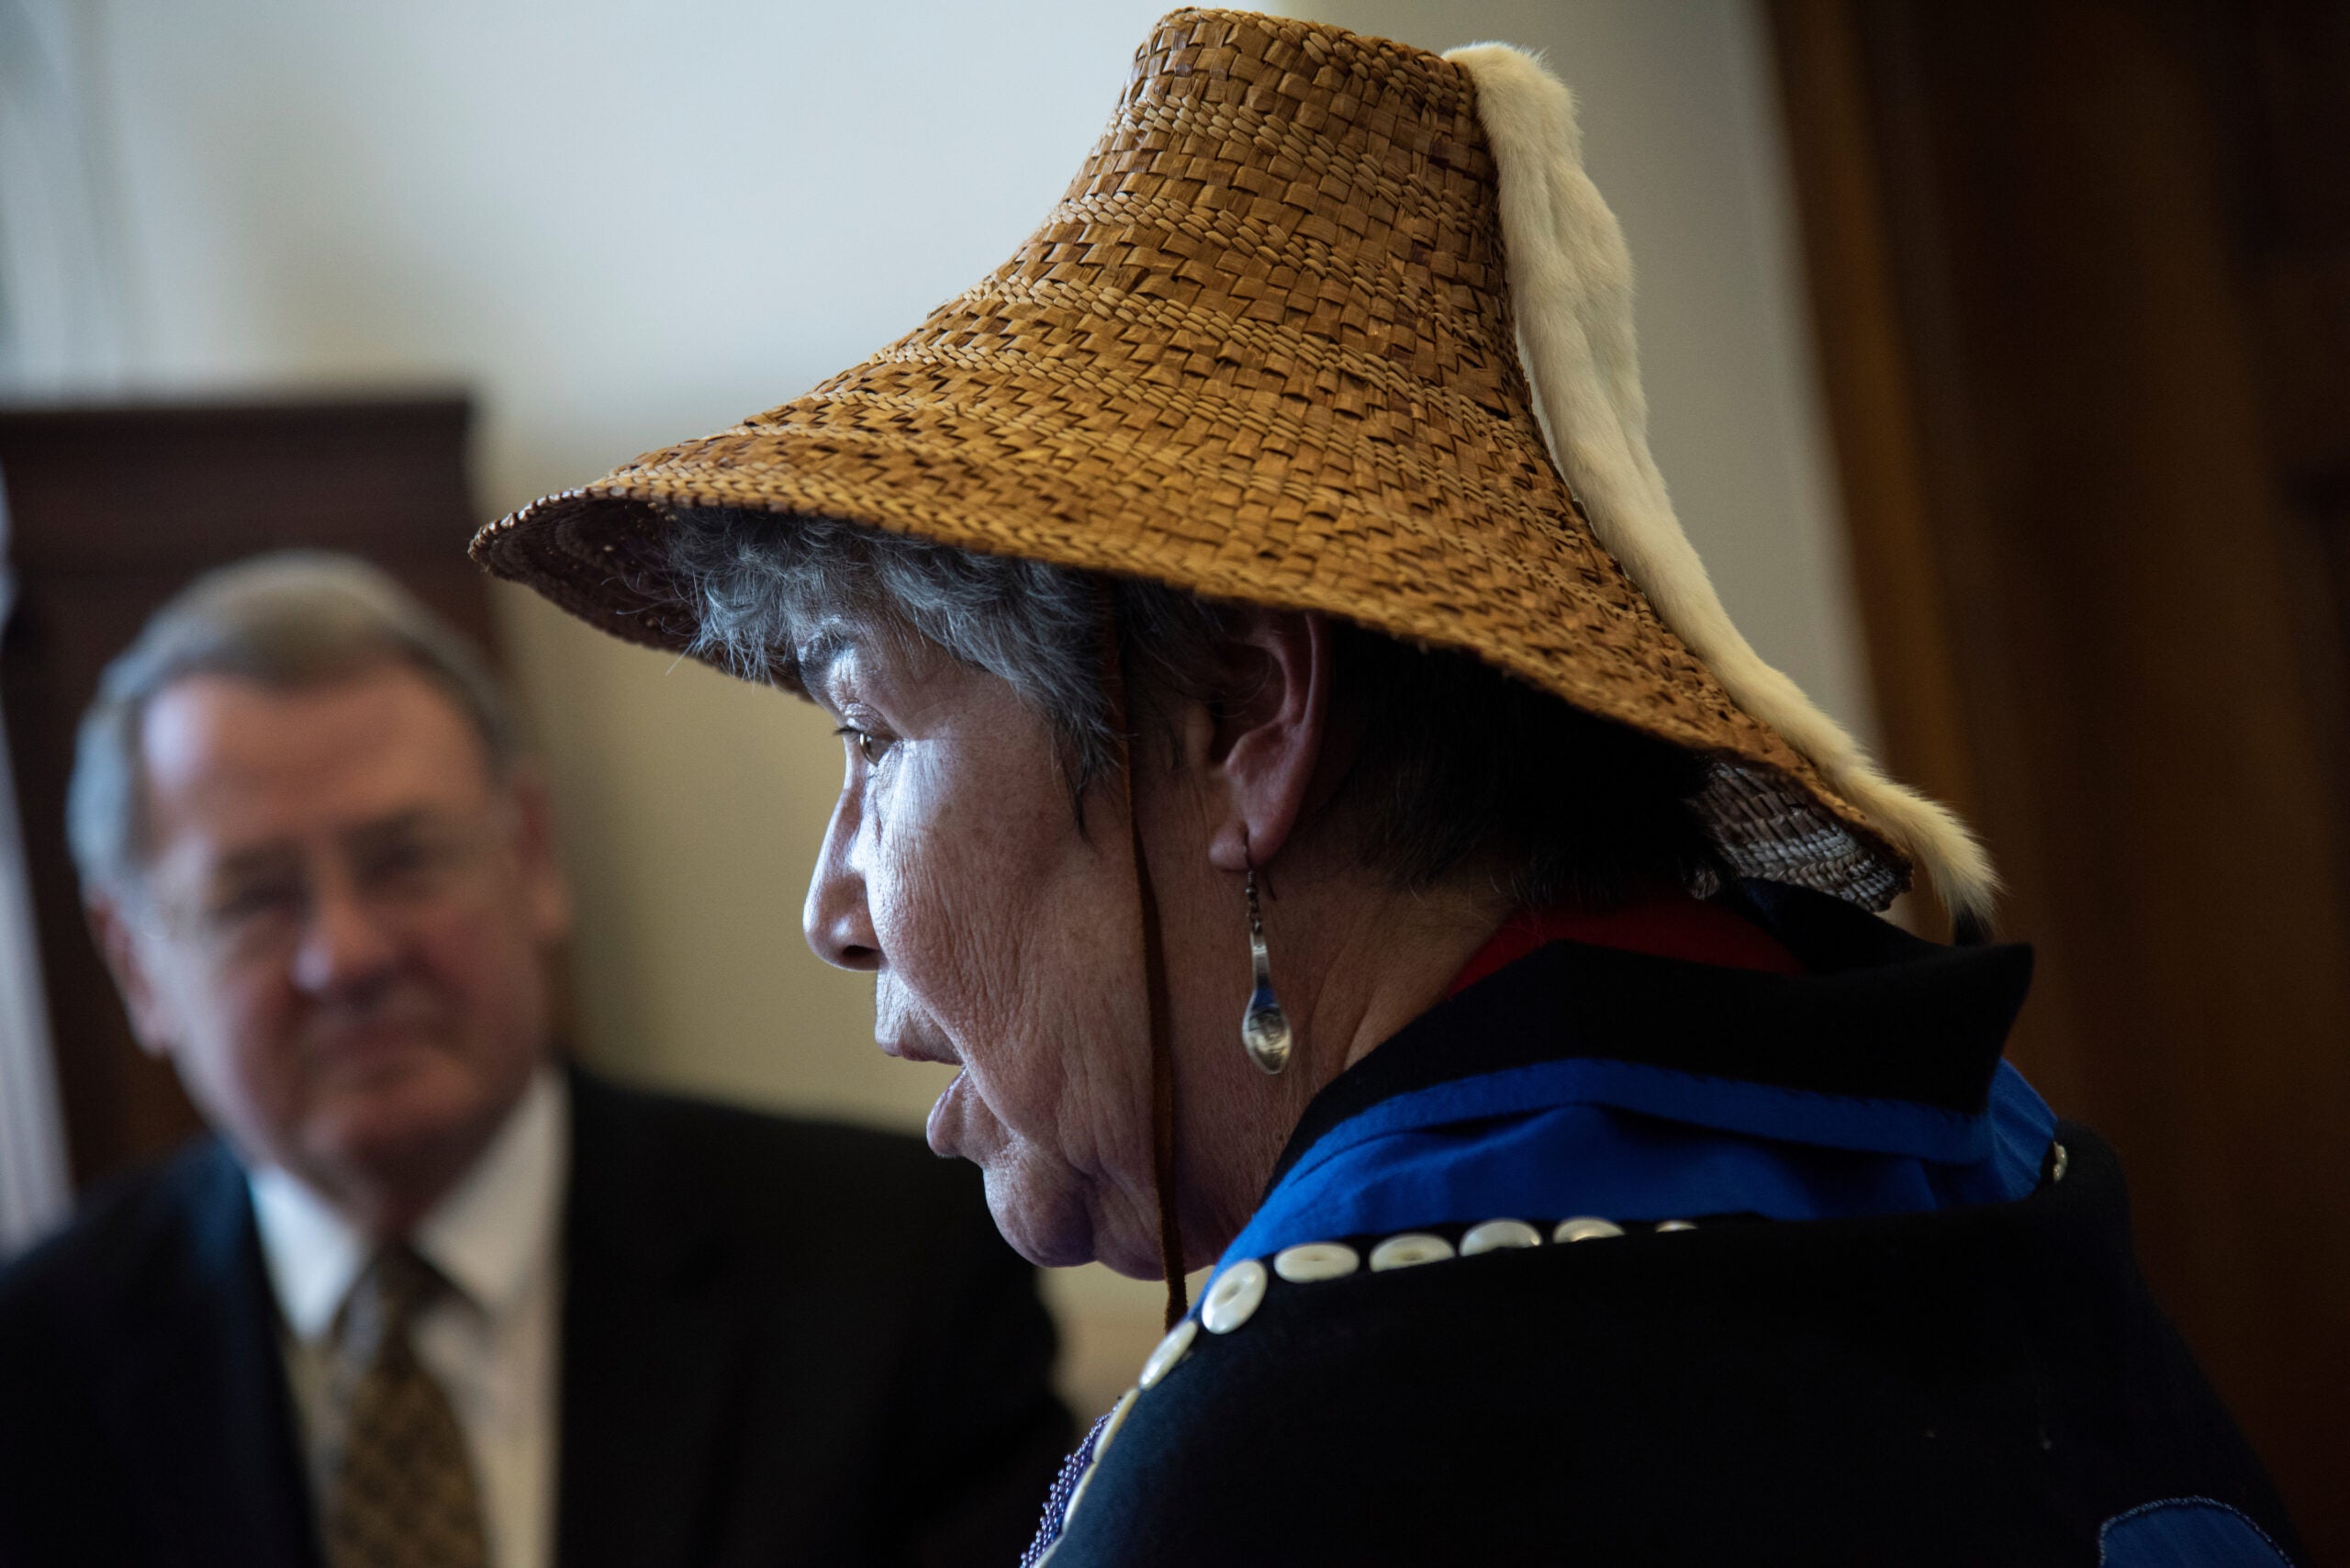 Tlingit tribal member Wanda Culp traveled to Washington to ask U.S. Forest Service head Jim Hubbard to protect Alaska&#039;s Tongass National Forest, where Culp lives.